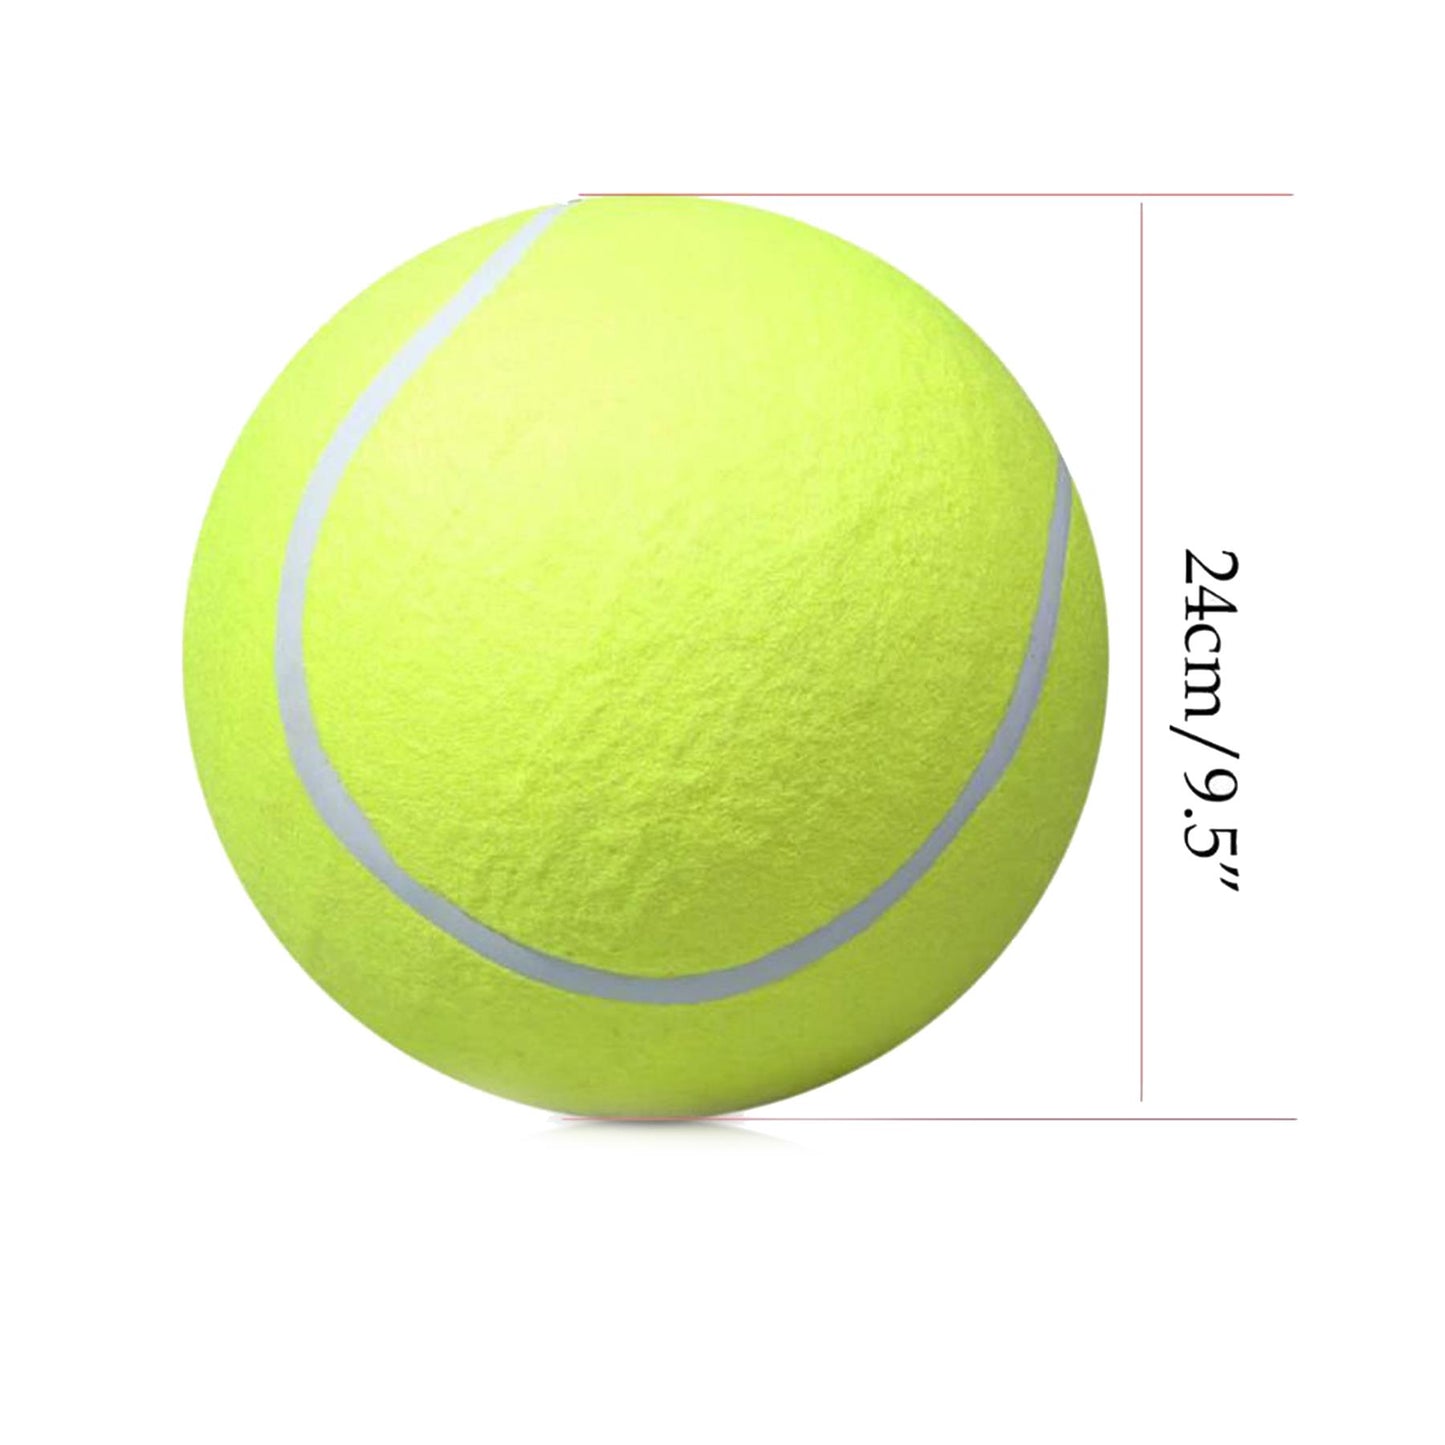 Giant Tennis Ball 24cm by The Magic Toy Shop - UKBuyZone